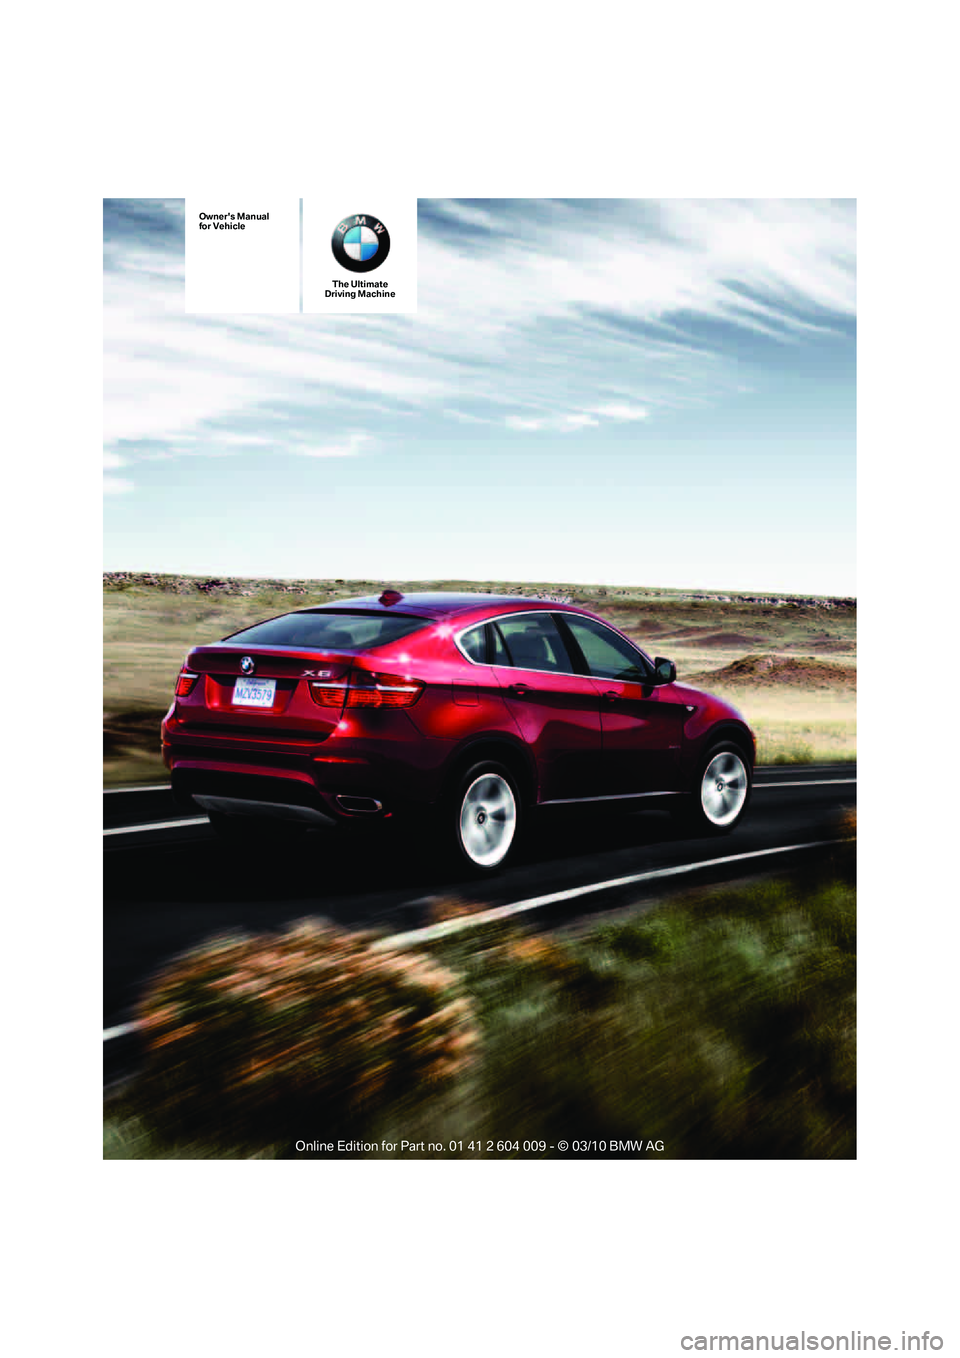 BMW X5 XDRIVE 50I 2011  Owners Manual The Ultimate
Driving Machine
Owners Manual
for Vehicle 